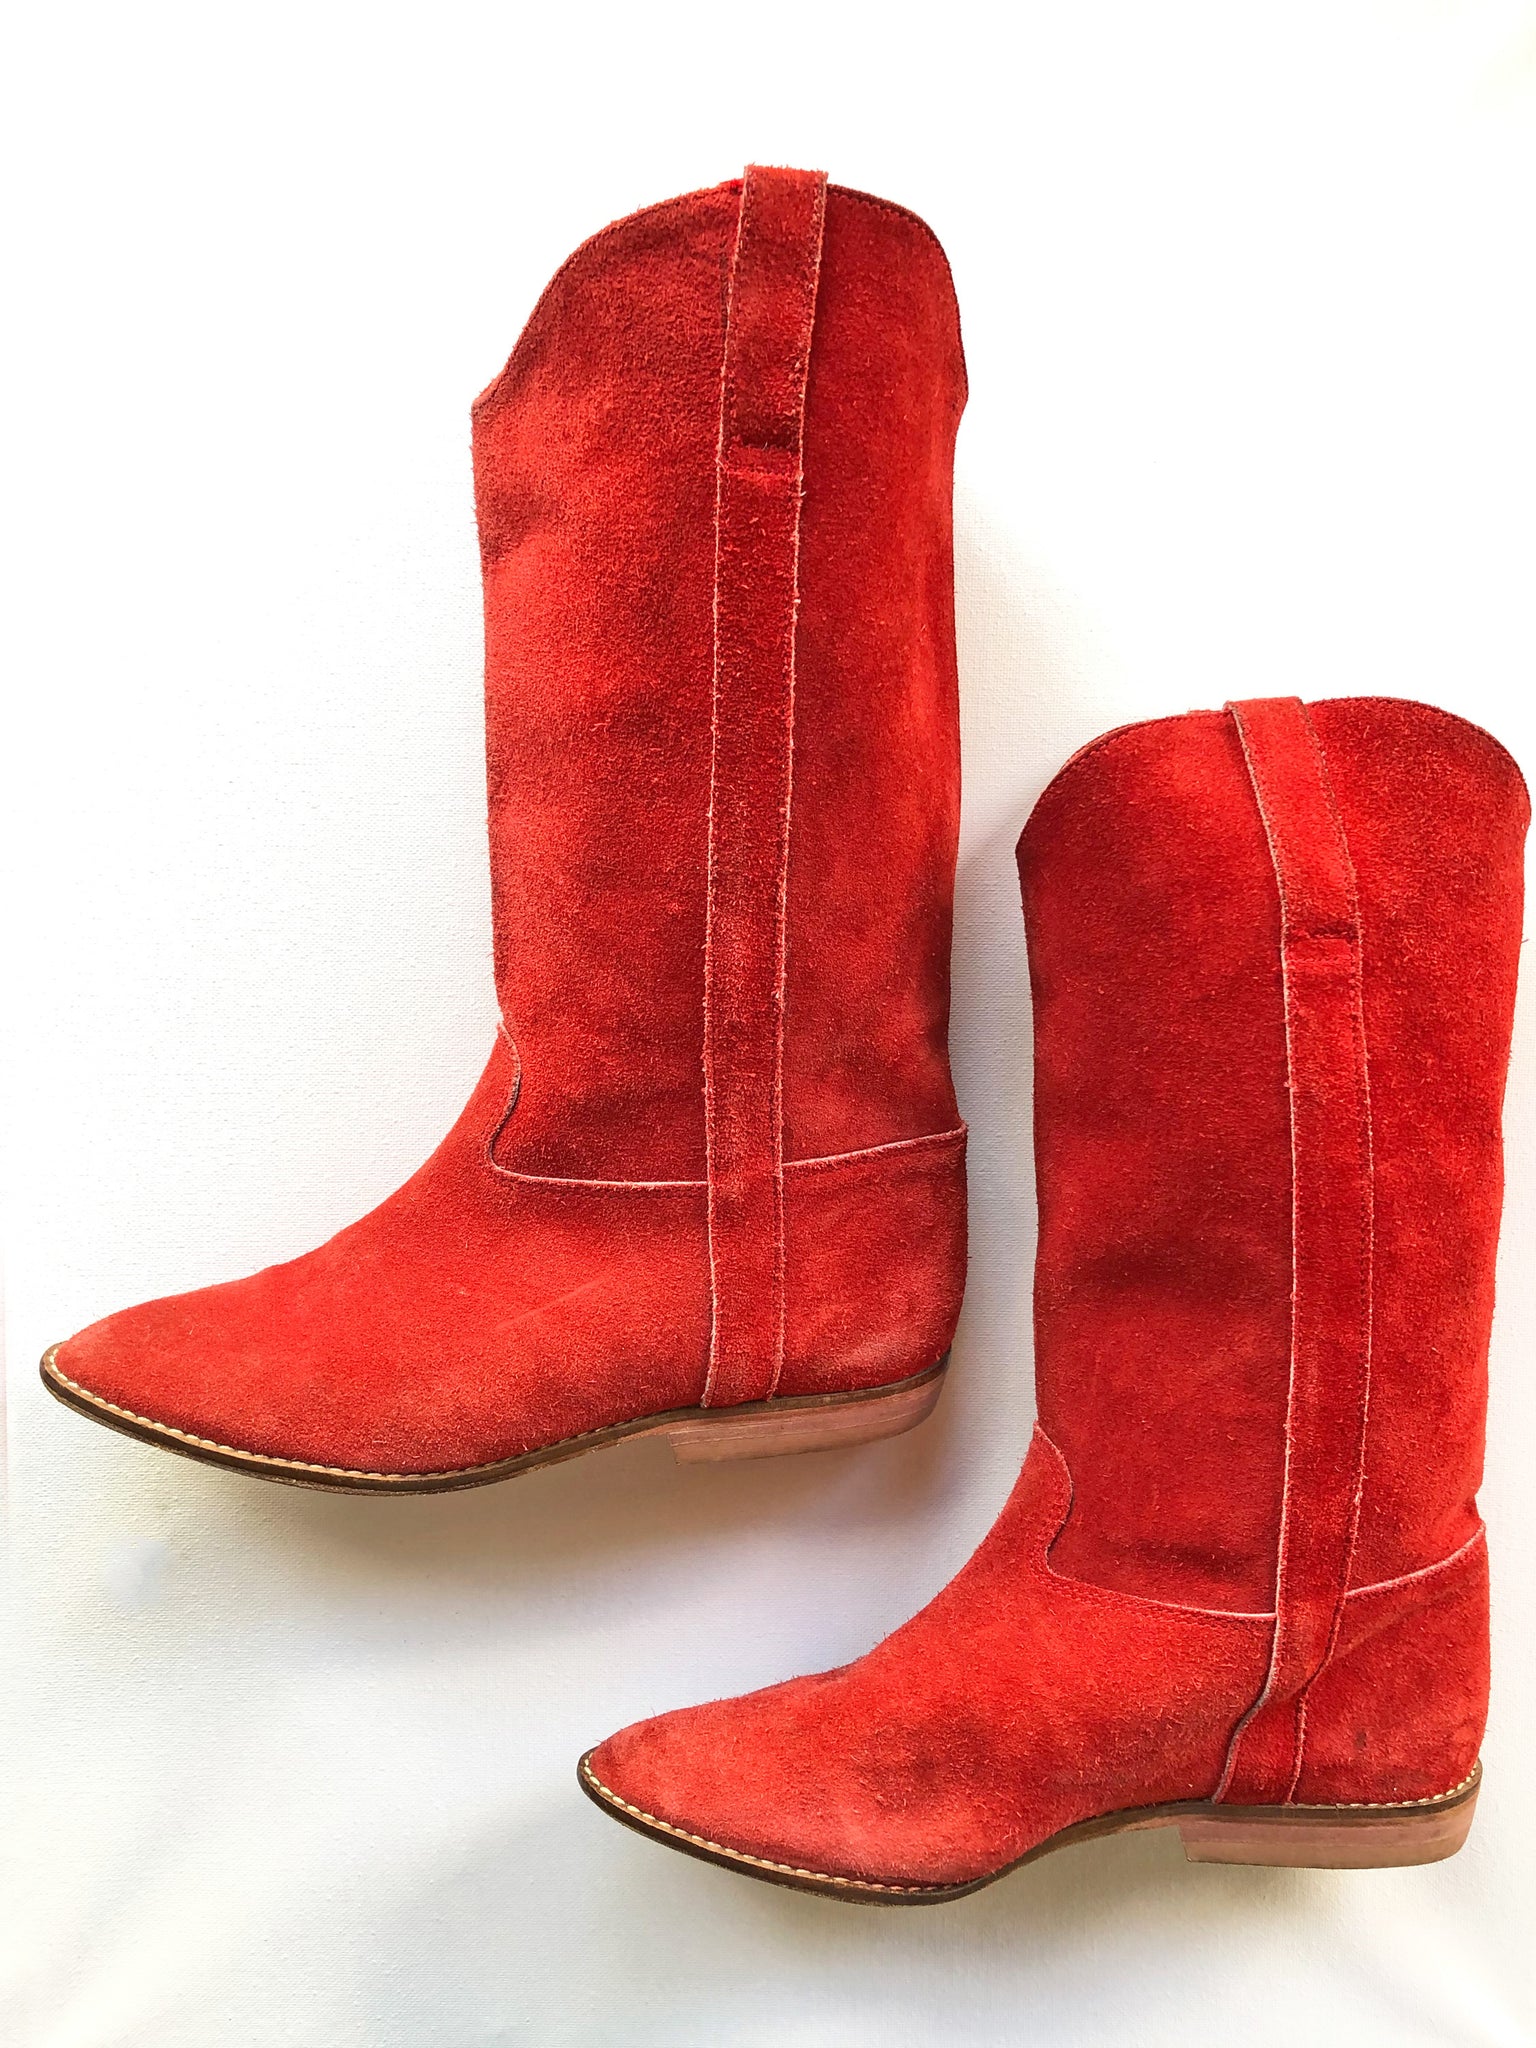 VINTAGE: Western Boots - Red Suede